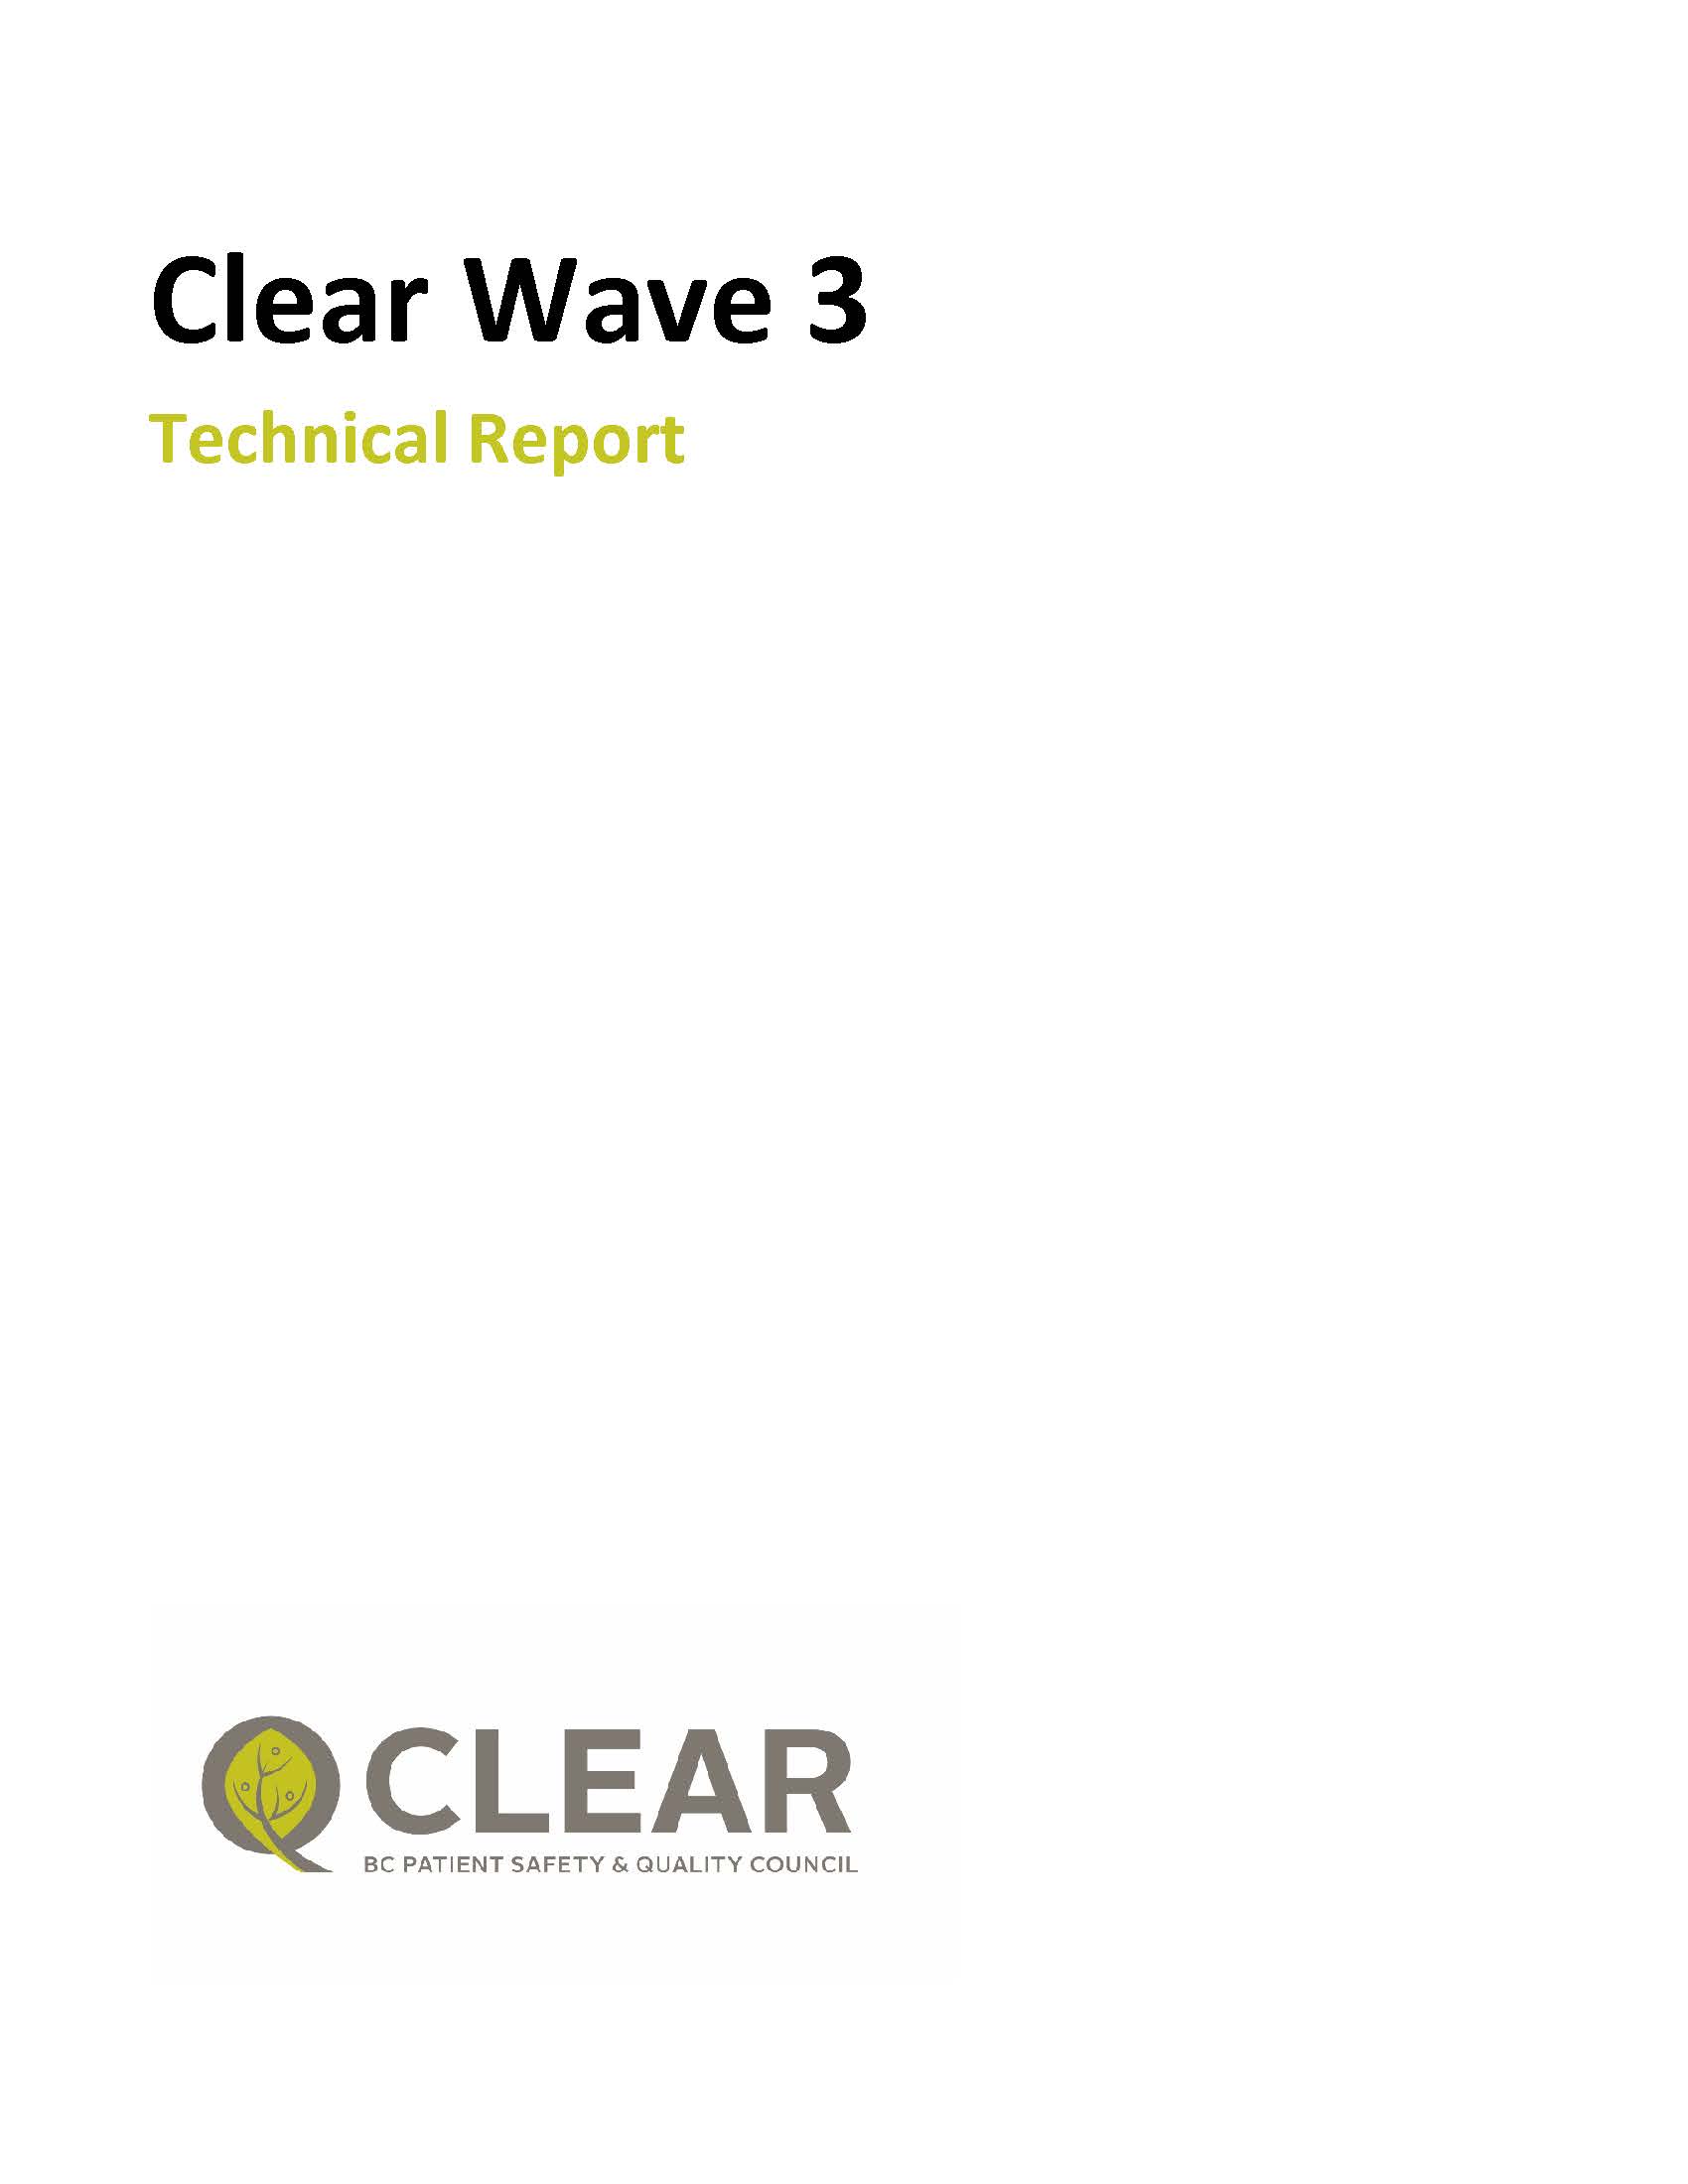 Clear-Wave-3-Technical-Report_Final Cover